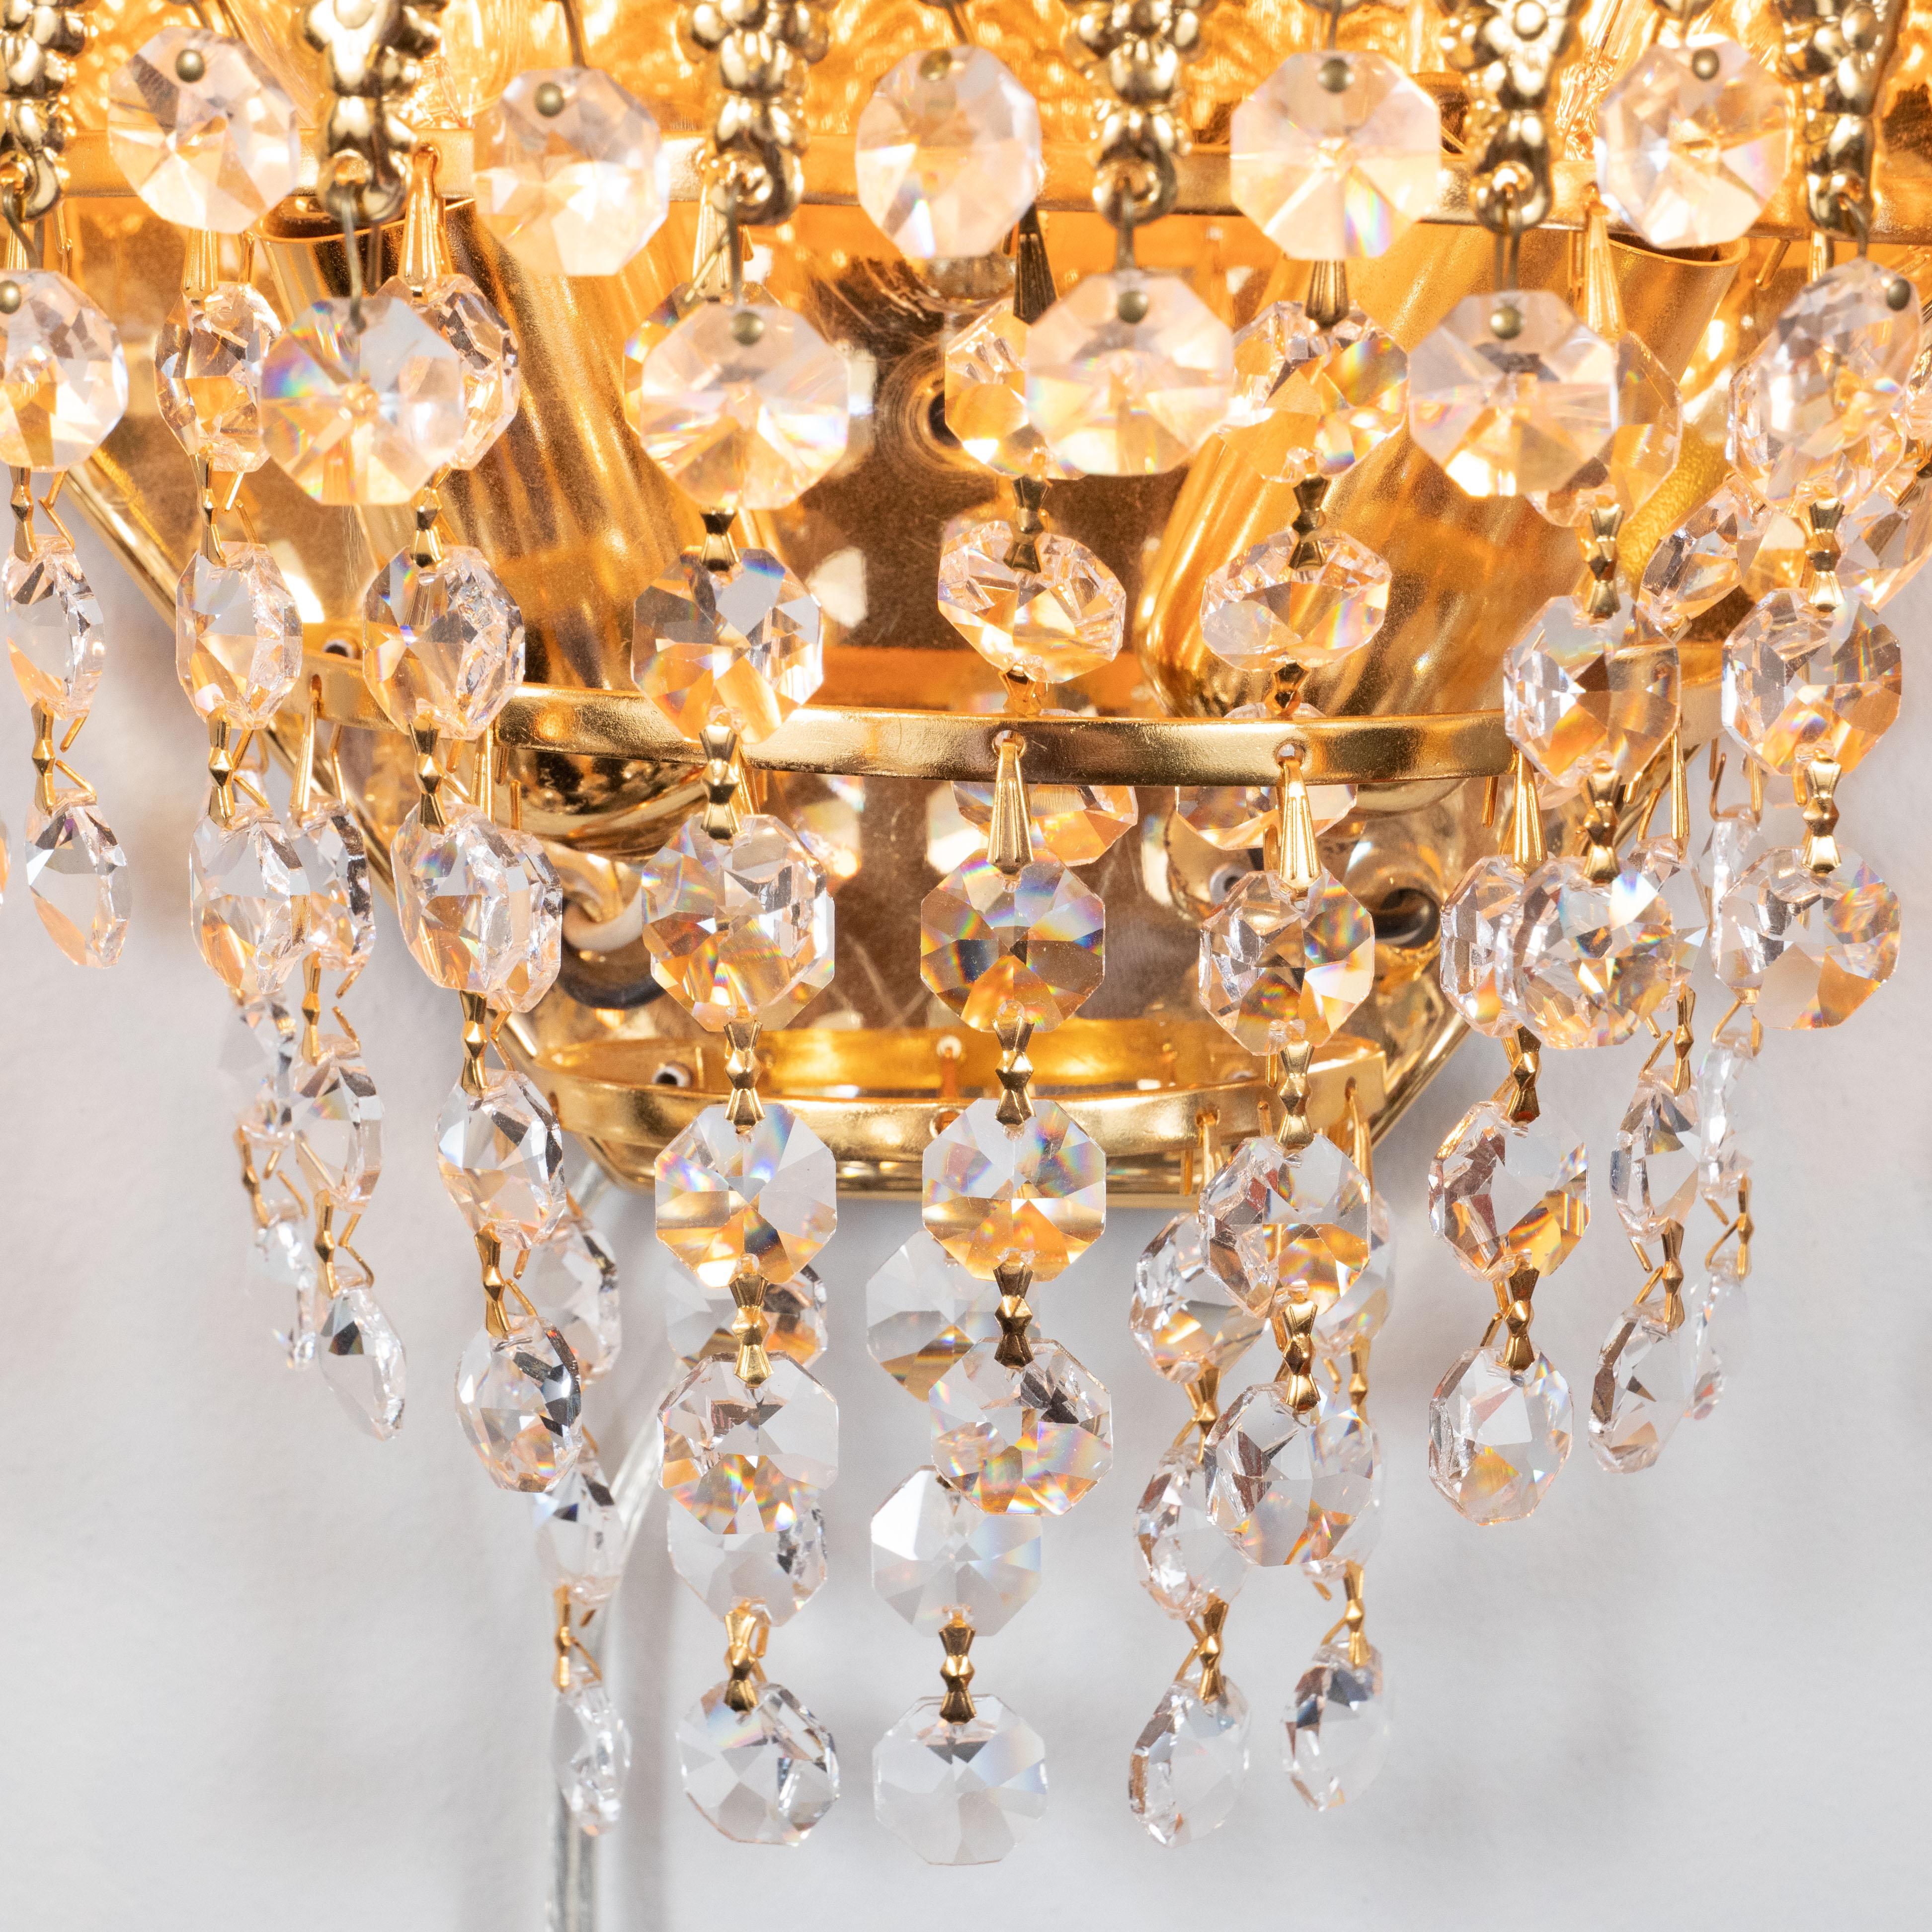 American Hollywood Regency Faceted Crystal Teardrop Sconces with Gold-Plated Fittings